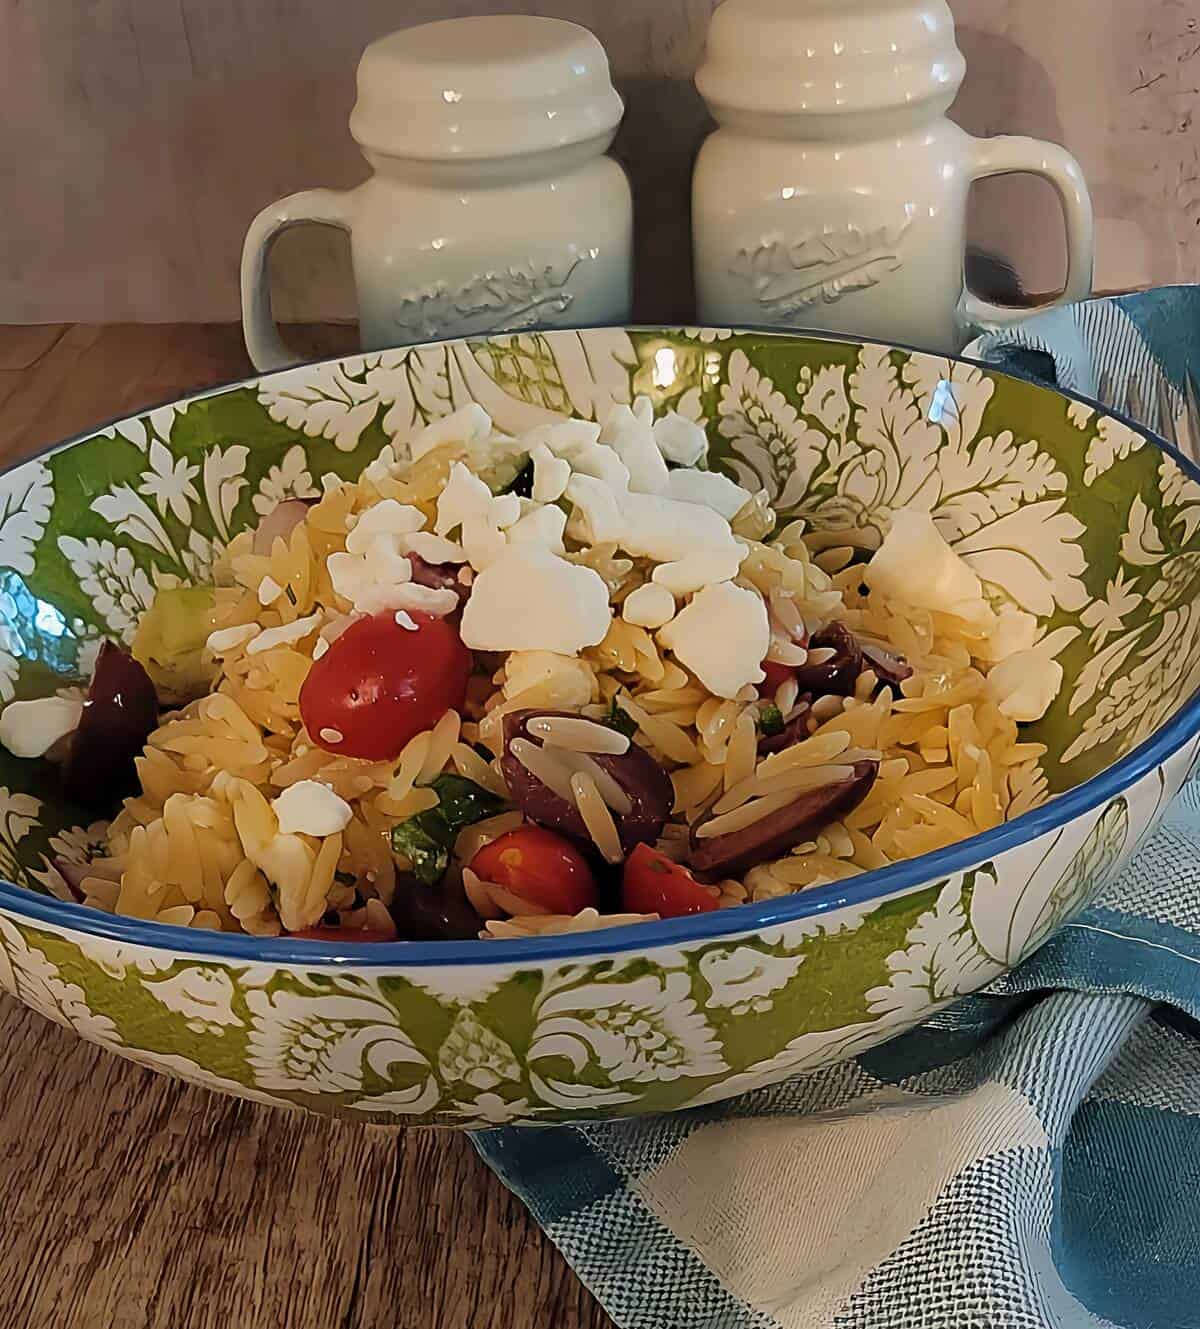 finished Greek orzo pasta in a bowl topped with feta cheese